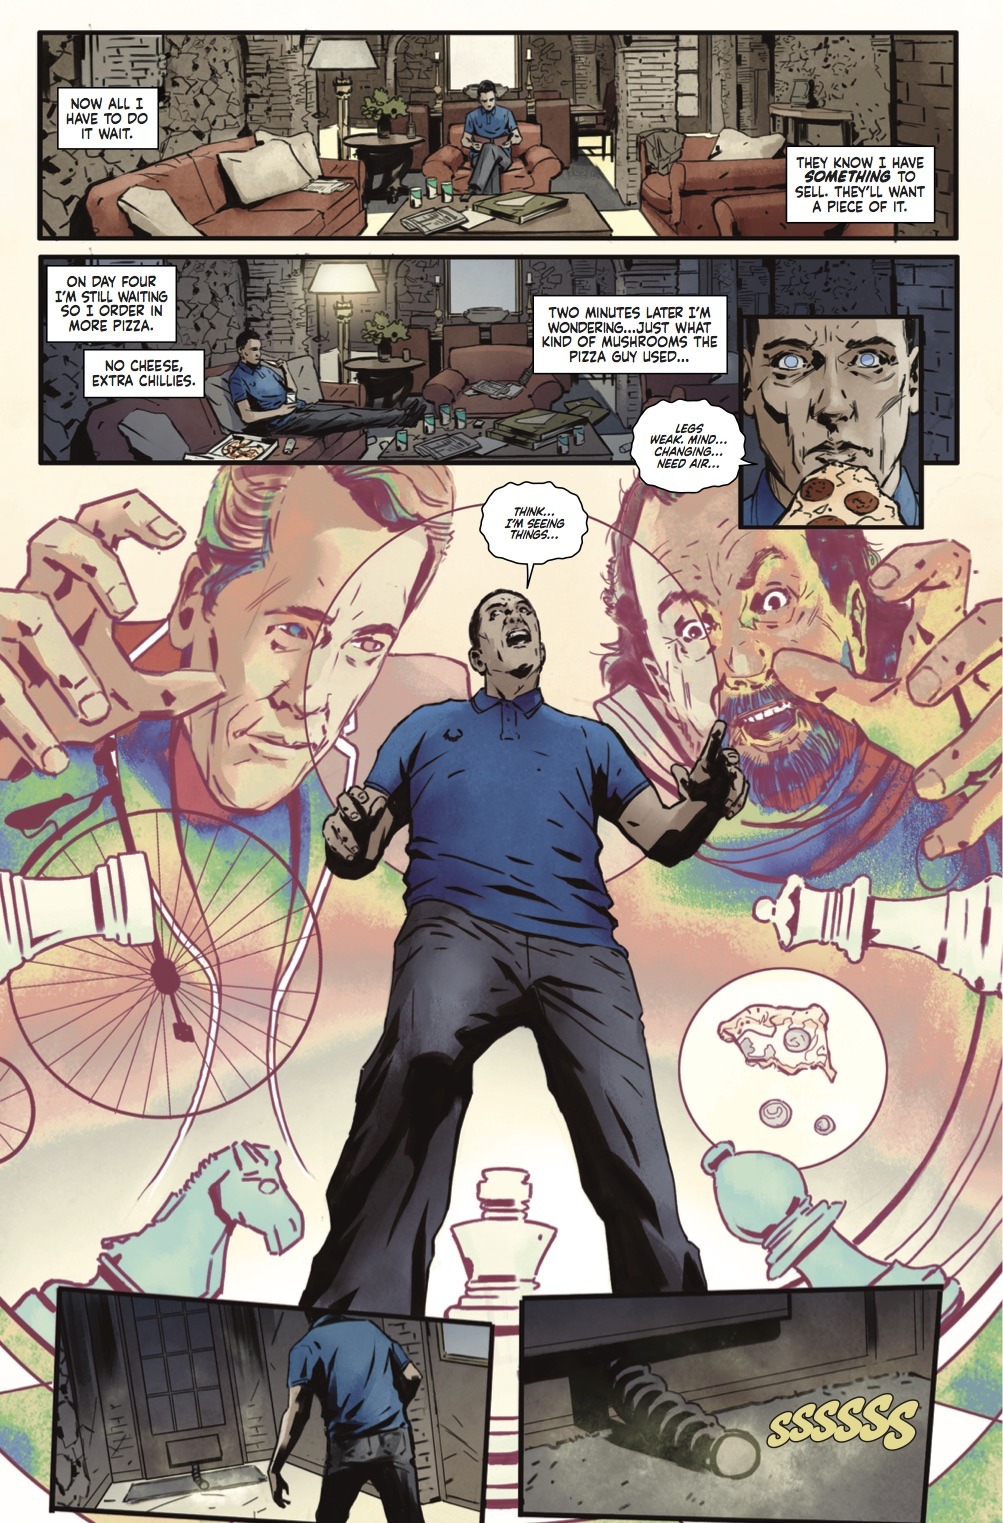 Double O Section Comic Book Review The Prisoner 1 